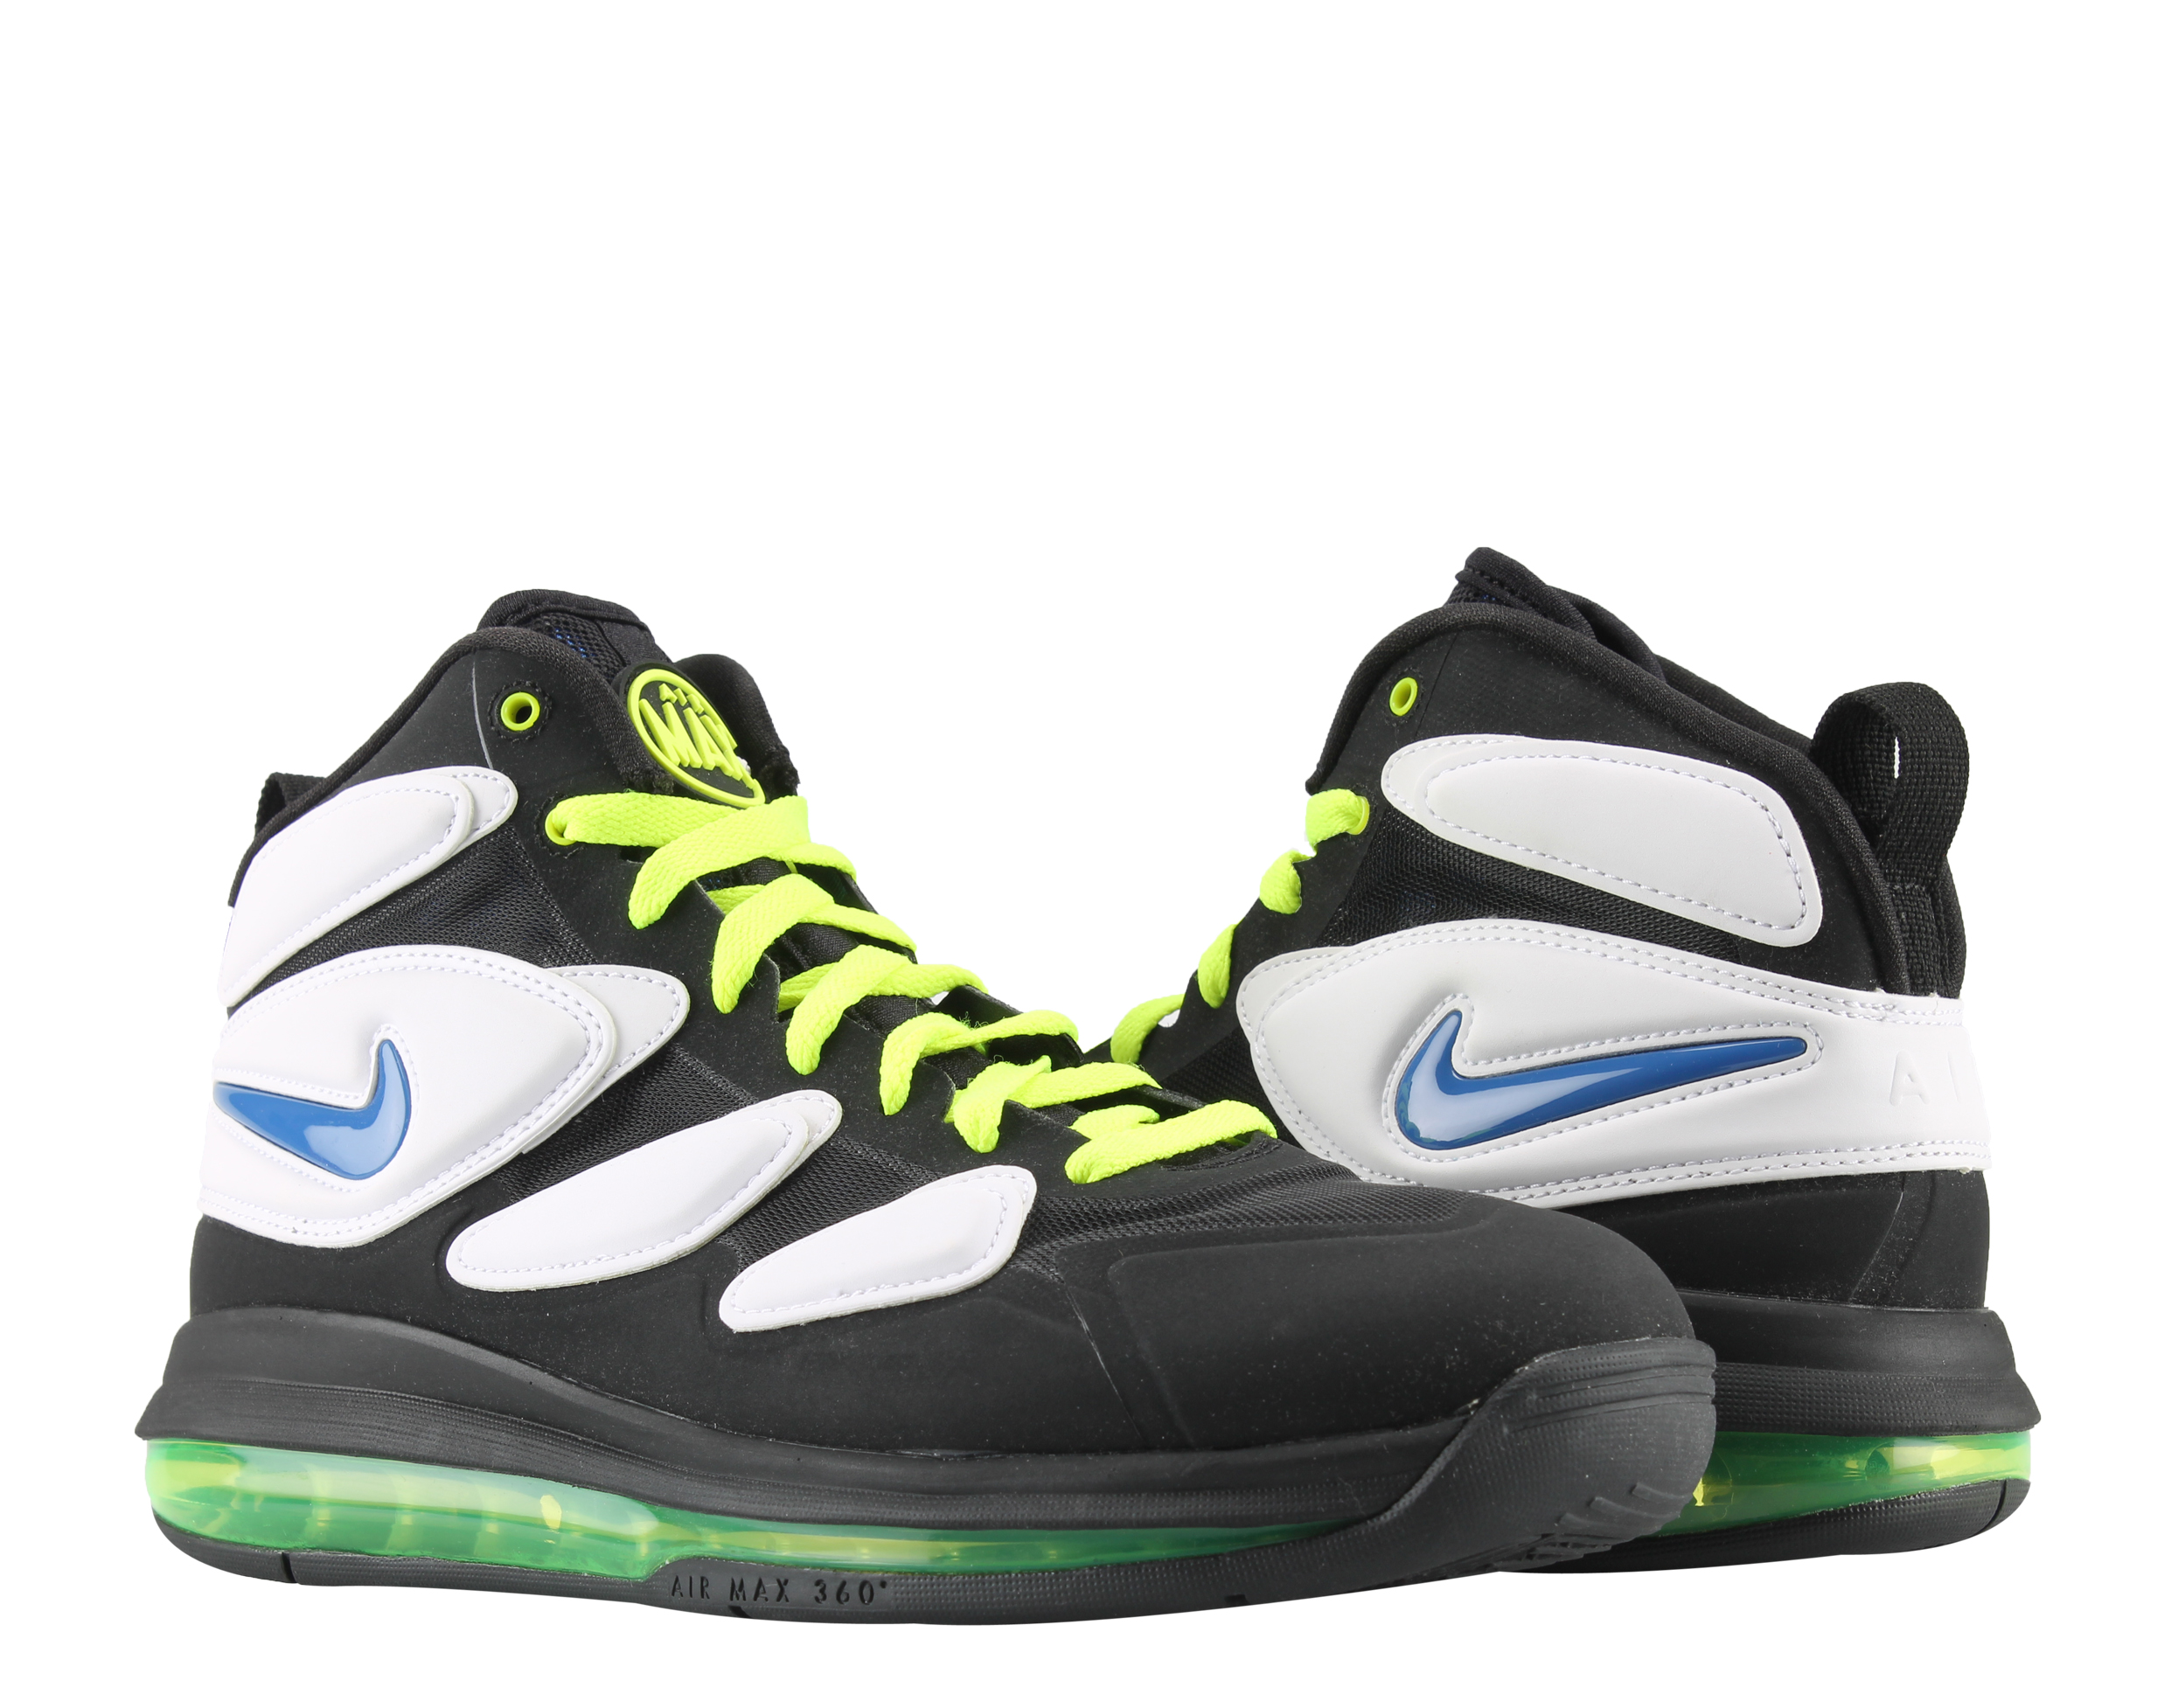 Nike Air Max Sq Uptempo Zm Basketball Men's Shoes - image 1 of 6